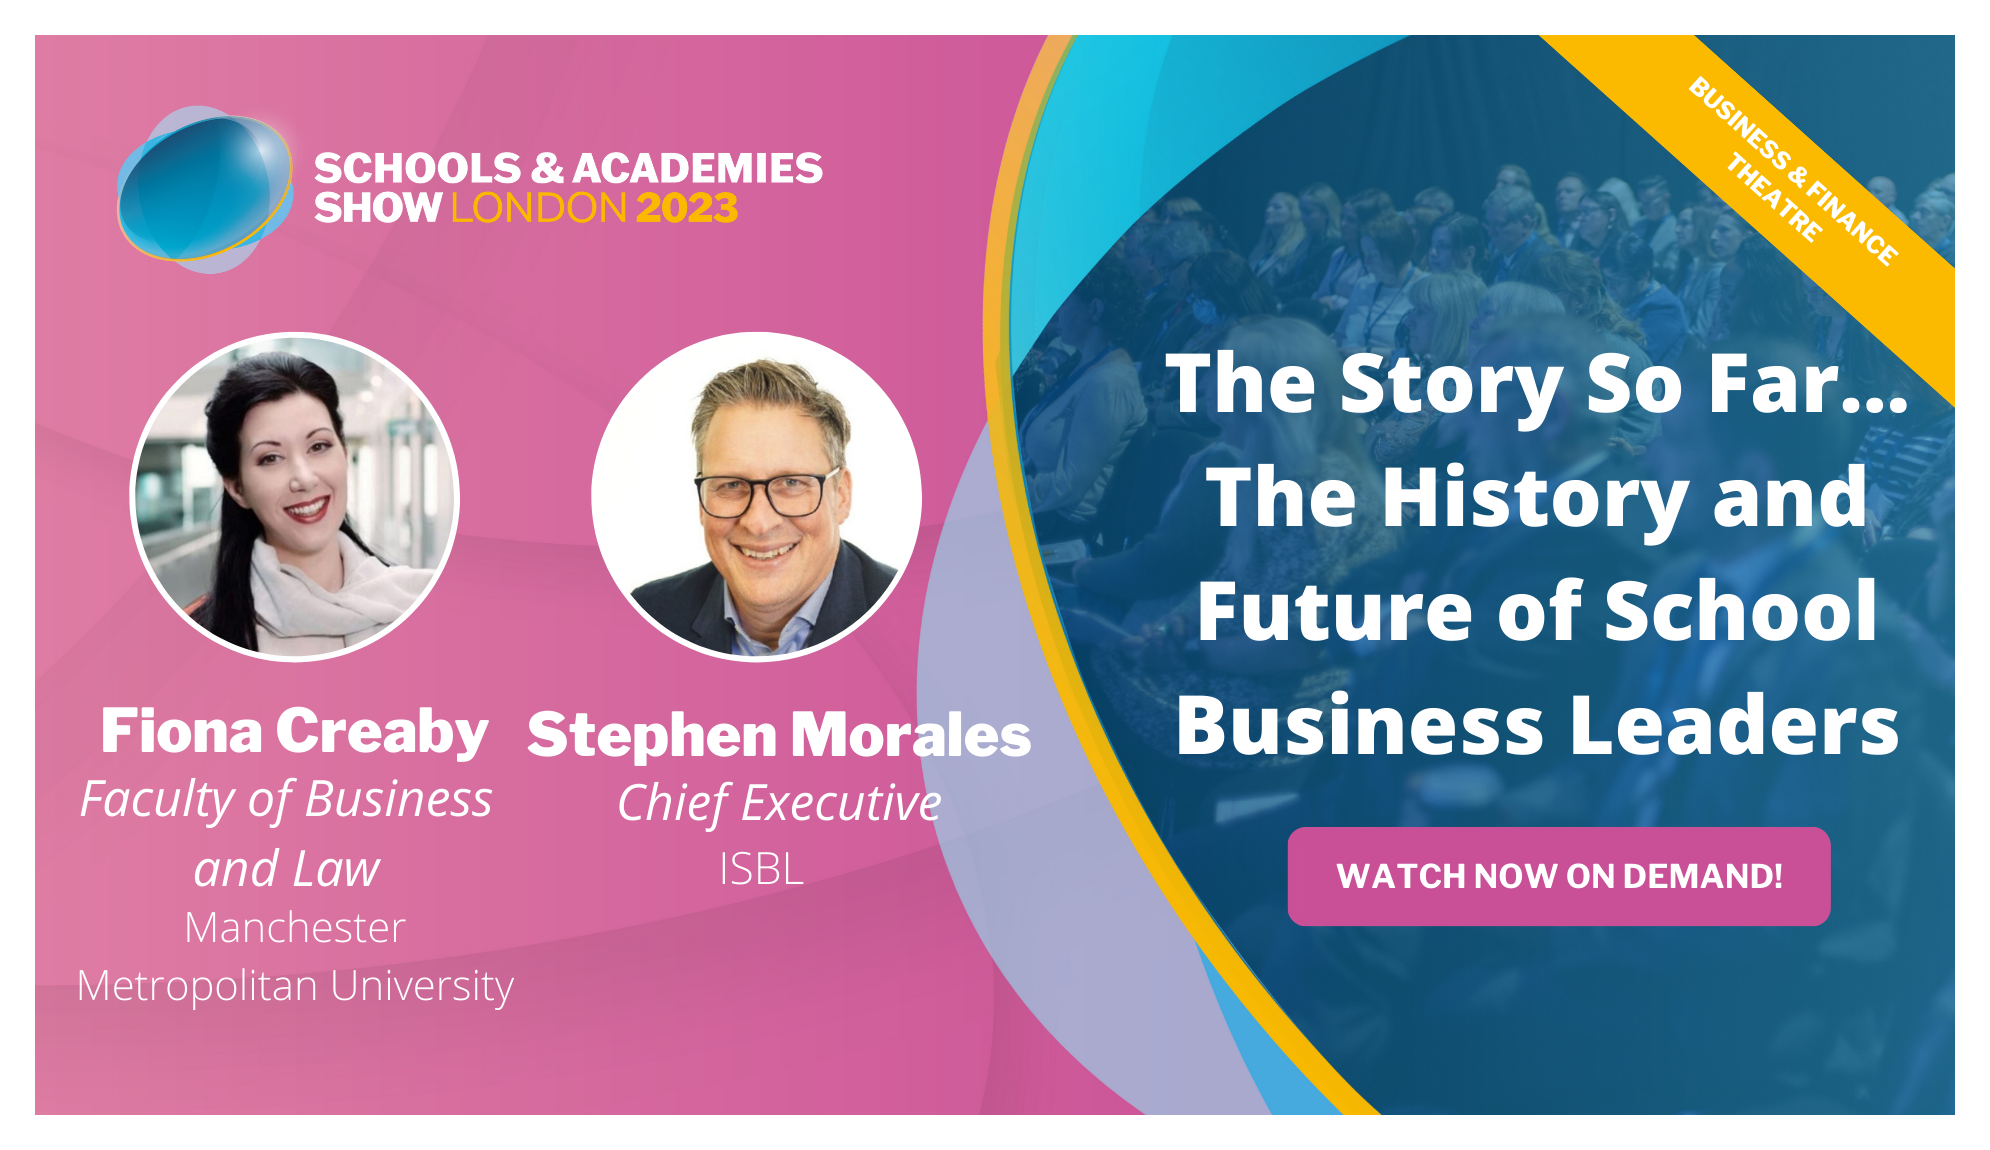 The Story So Far… The History and Future of School Business Leaders